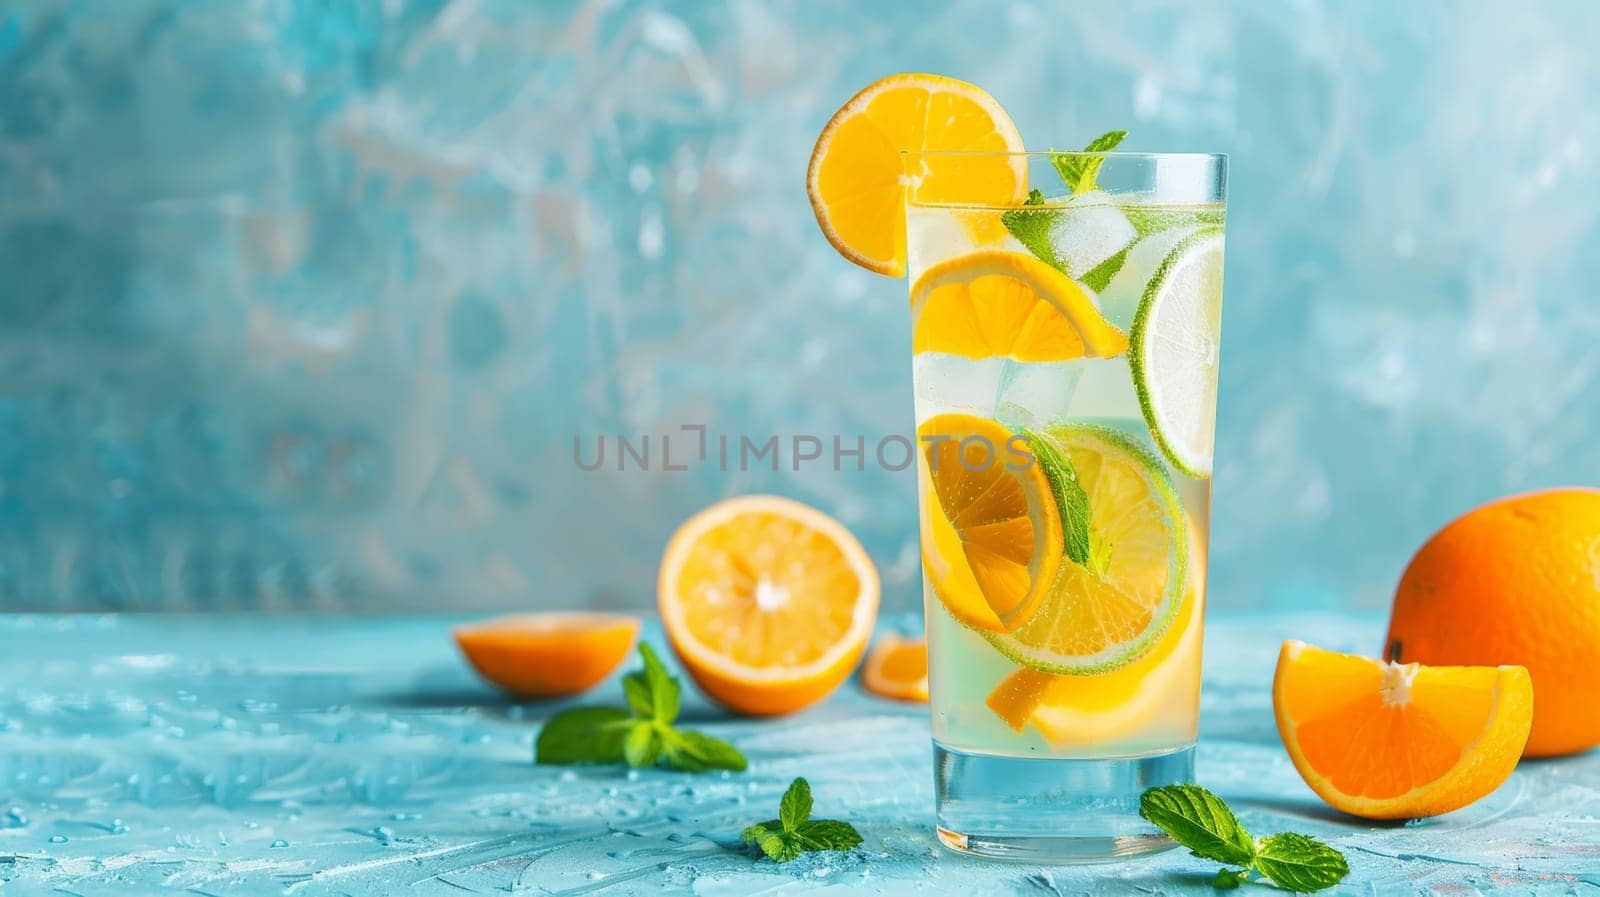 A tall glass of citrus refreshment filled with sparkling water, orange and lemon slices, and mint, on a textured blue surface. by sfinks